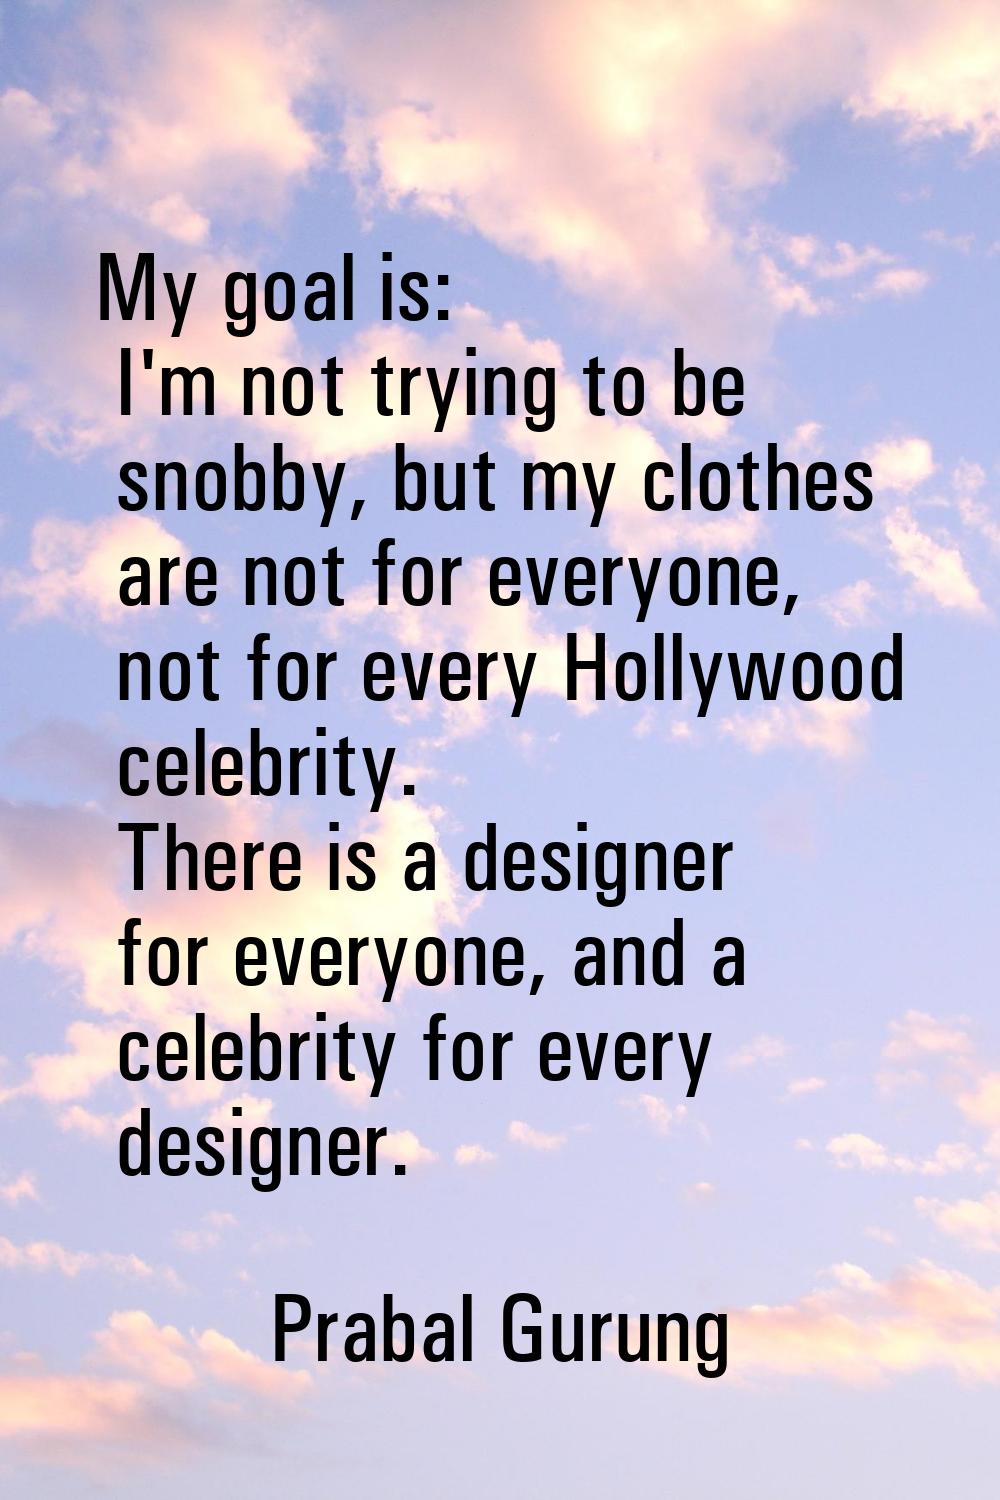 My goal is: I'm not trying to be snobby, but my clothes are not for everyone, not for every Hollywo